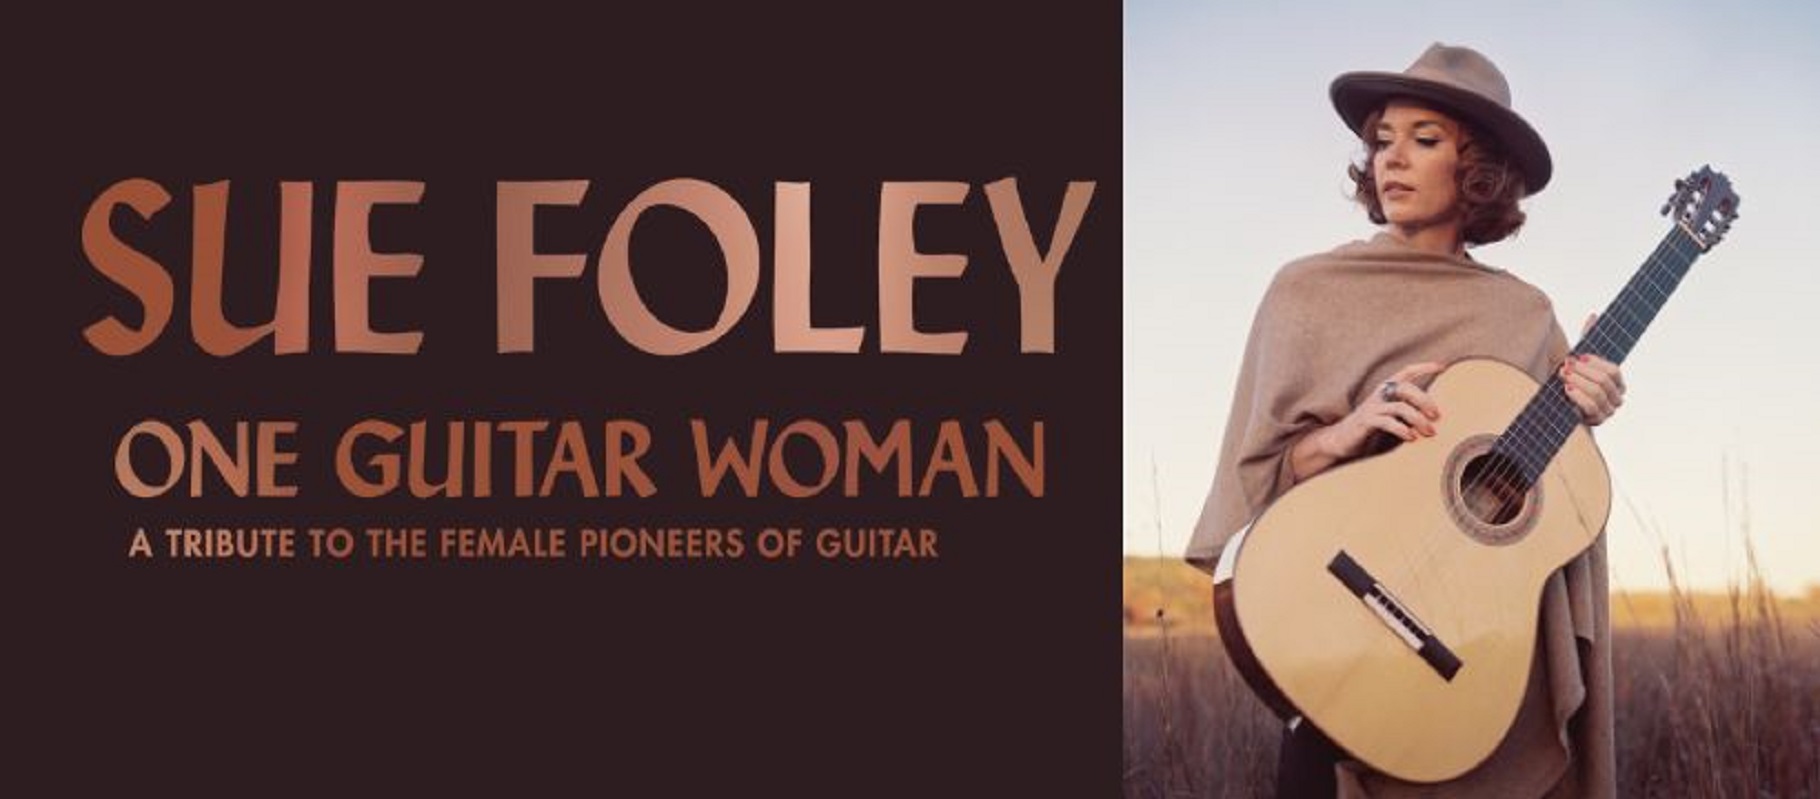 Sue Foley Announces New One Guitar Woman Album And Releases First Single – Elizabeth Cotten’s “Oh Babe It Ain’t No Lie”